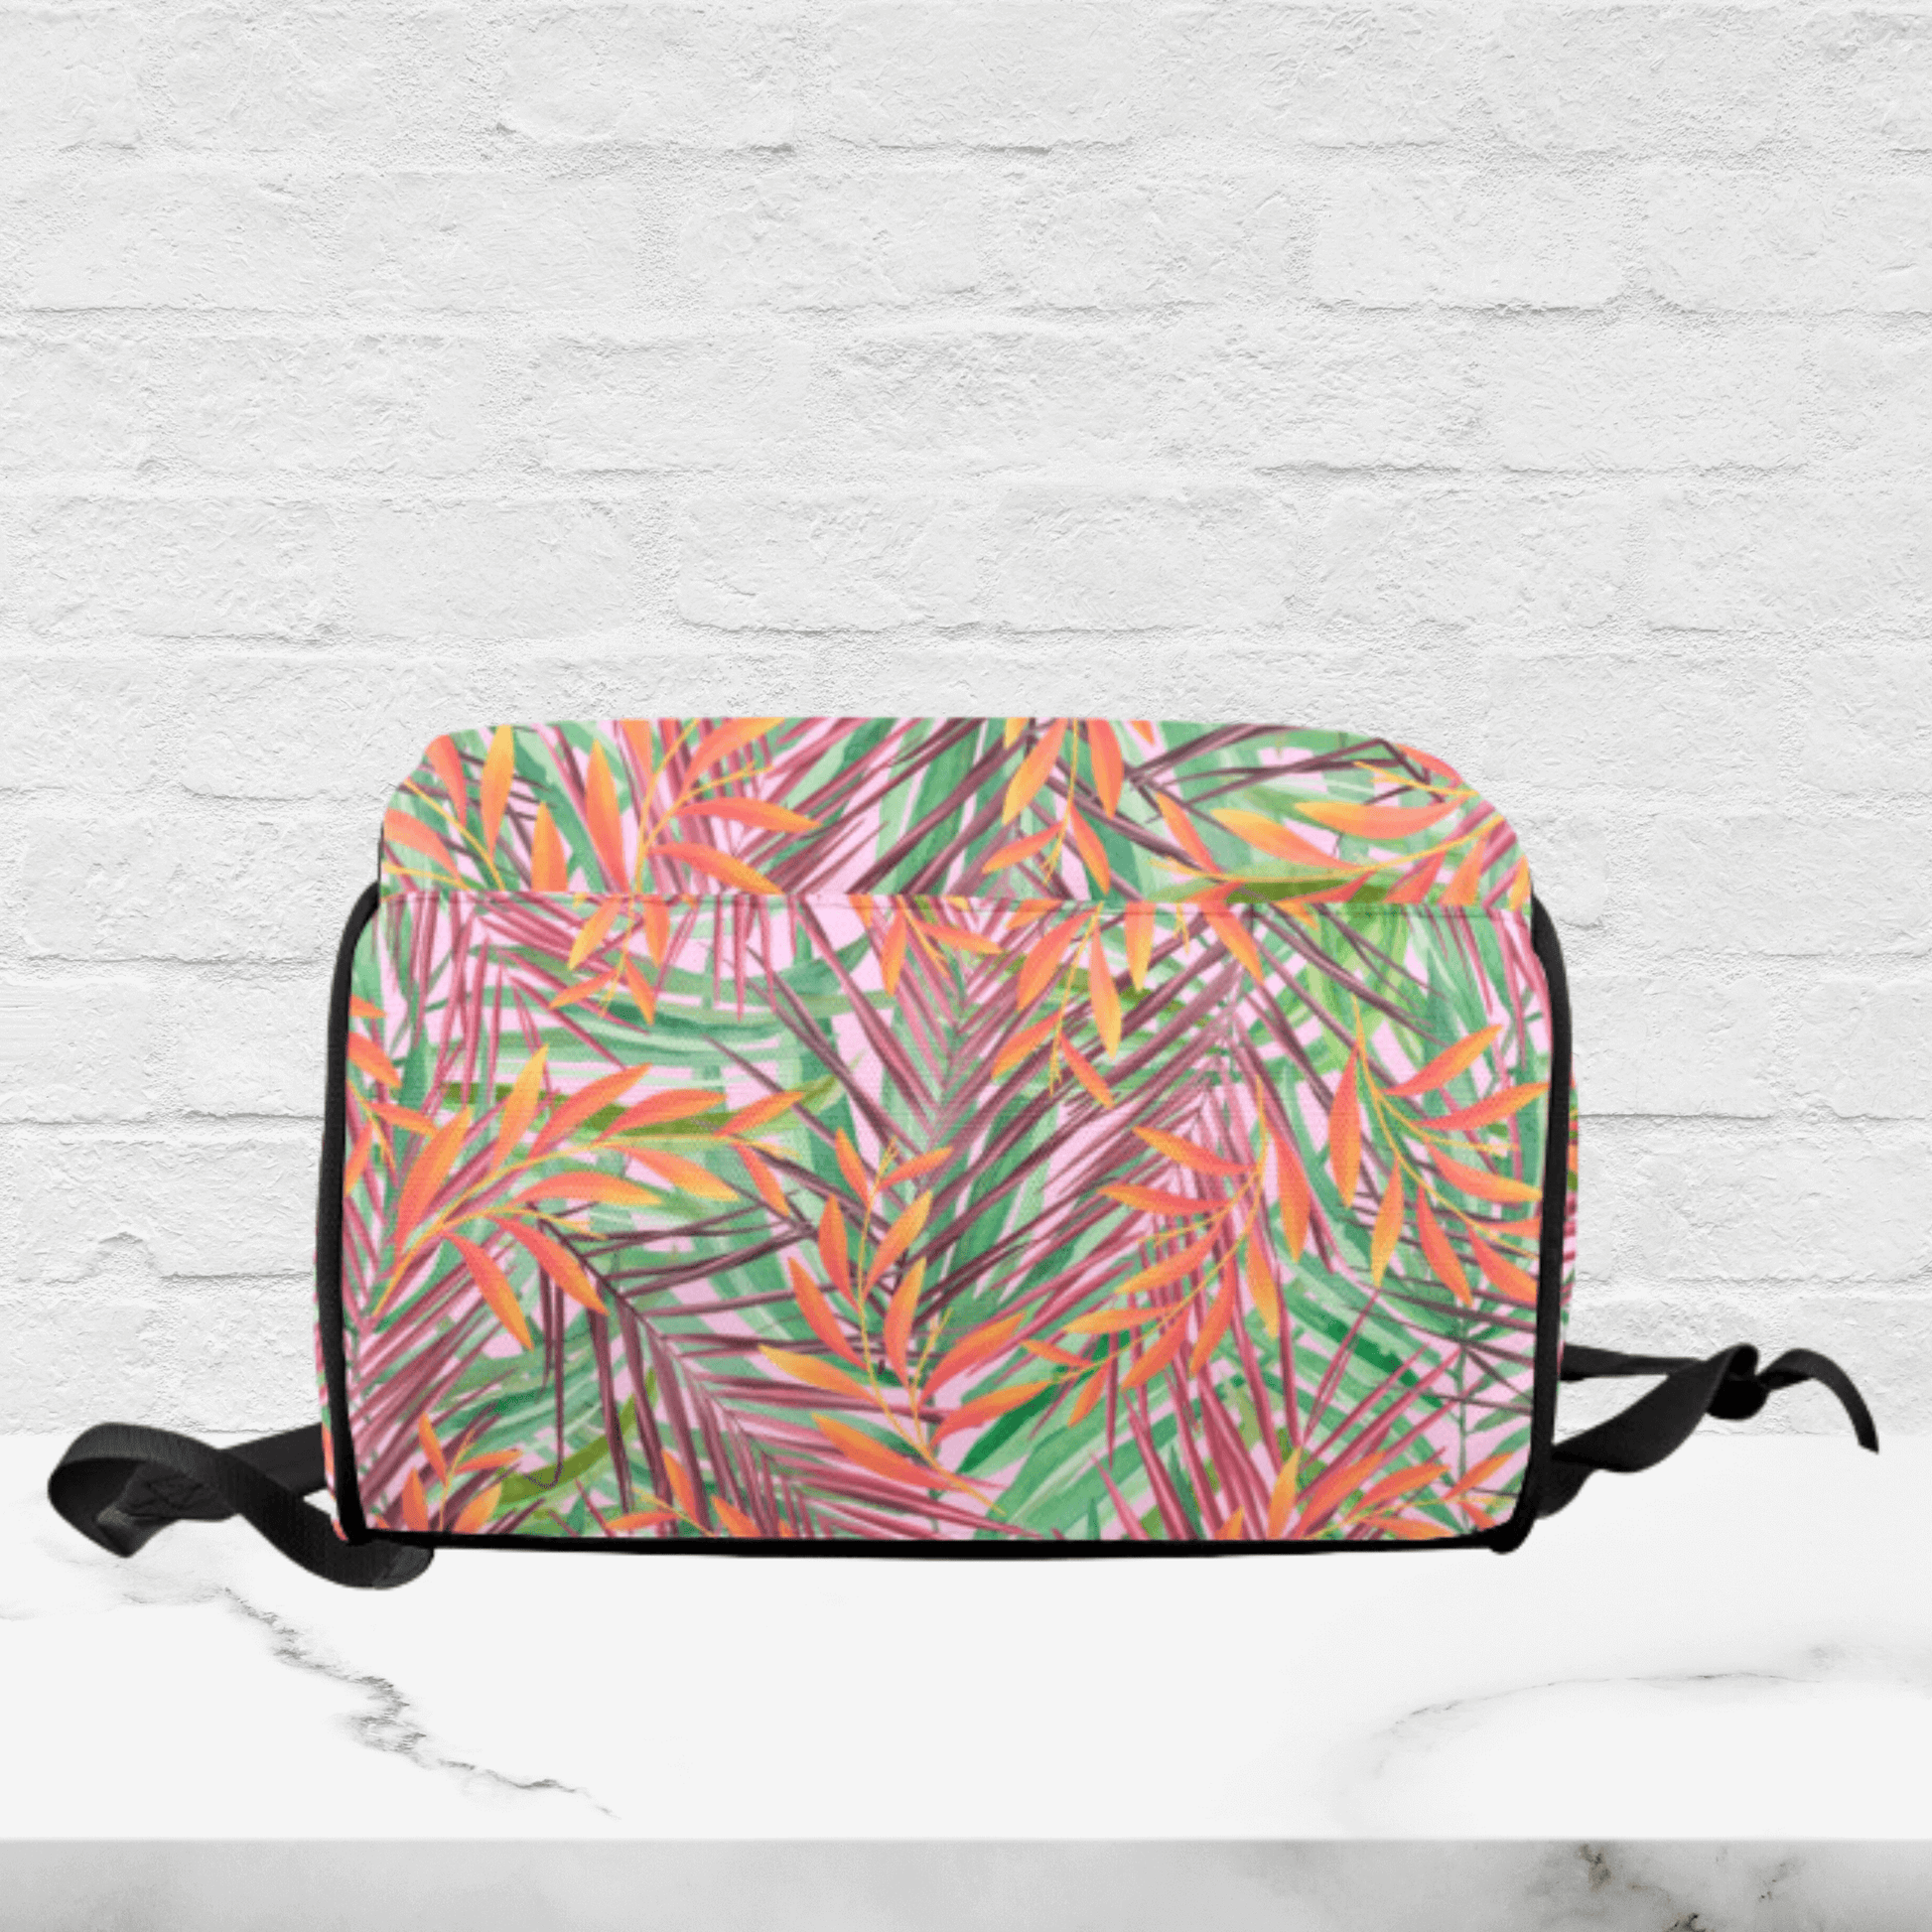 The bottom of the diaper bag is the tropical print design.